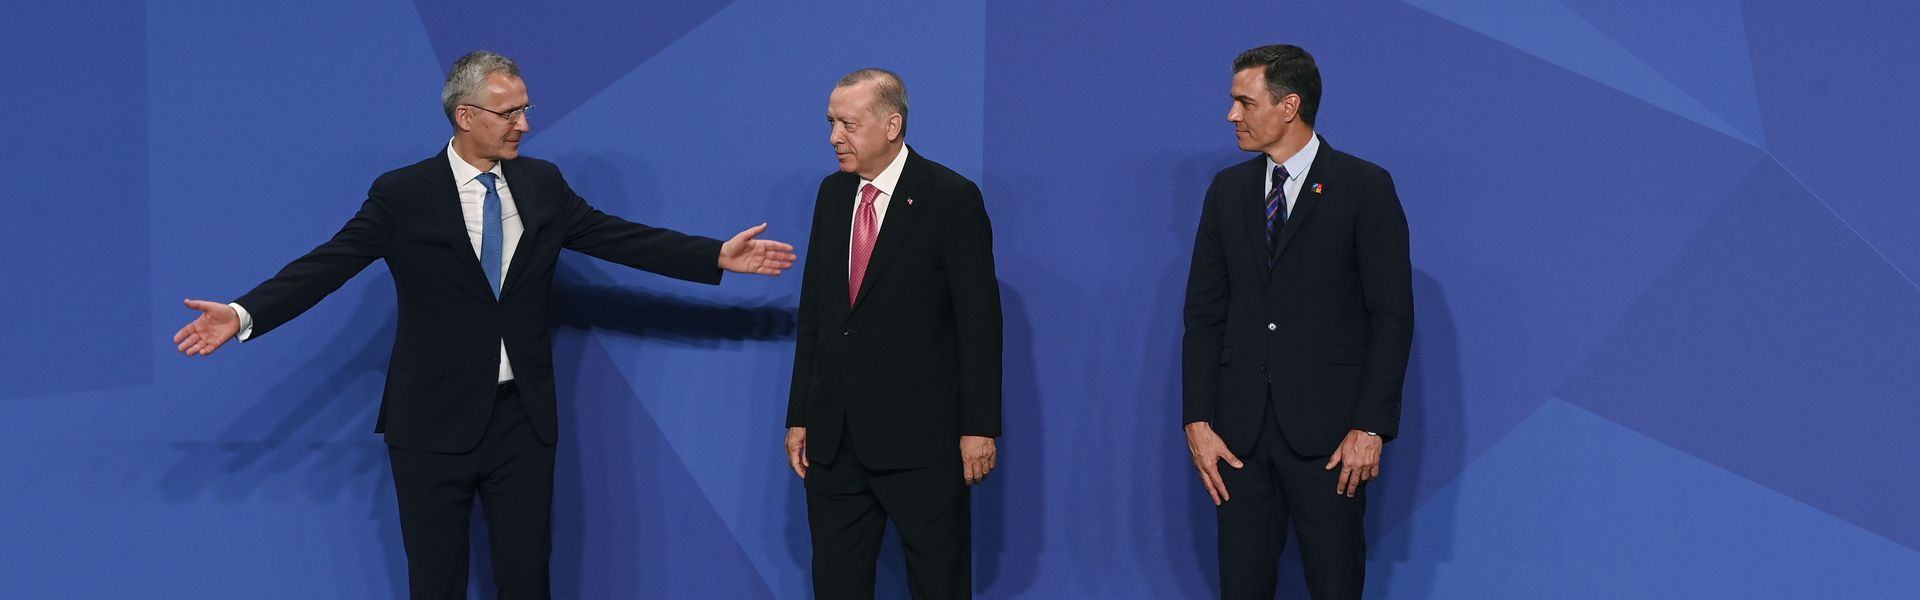 Turkish Prime Minister Recep Tayyip Erdoğan is greeted by NATO Secretary General Jens Stoltenberg and Prime Minister Pedro Sanchez of Spain, during the NATO summit in Madrid.